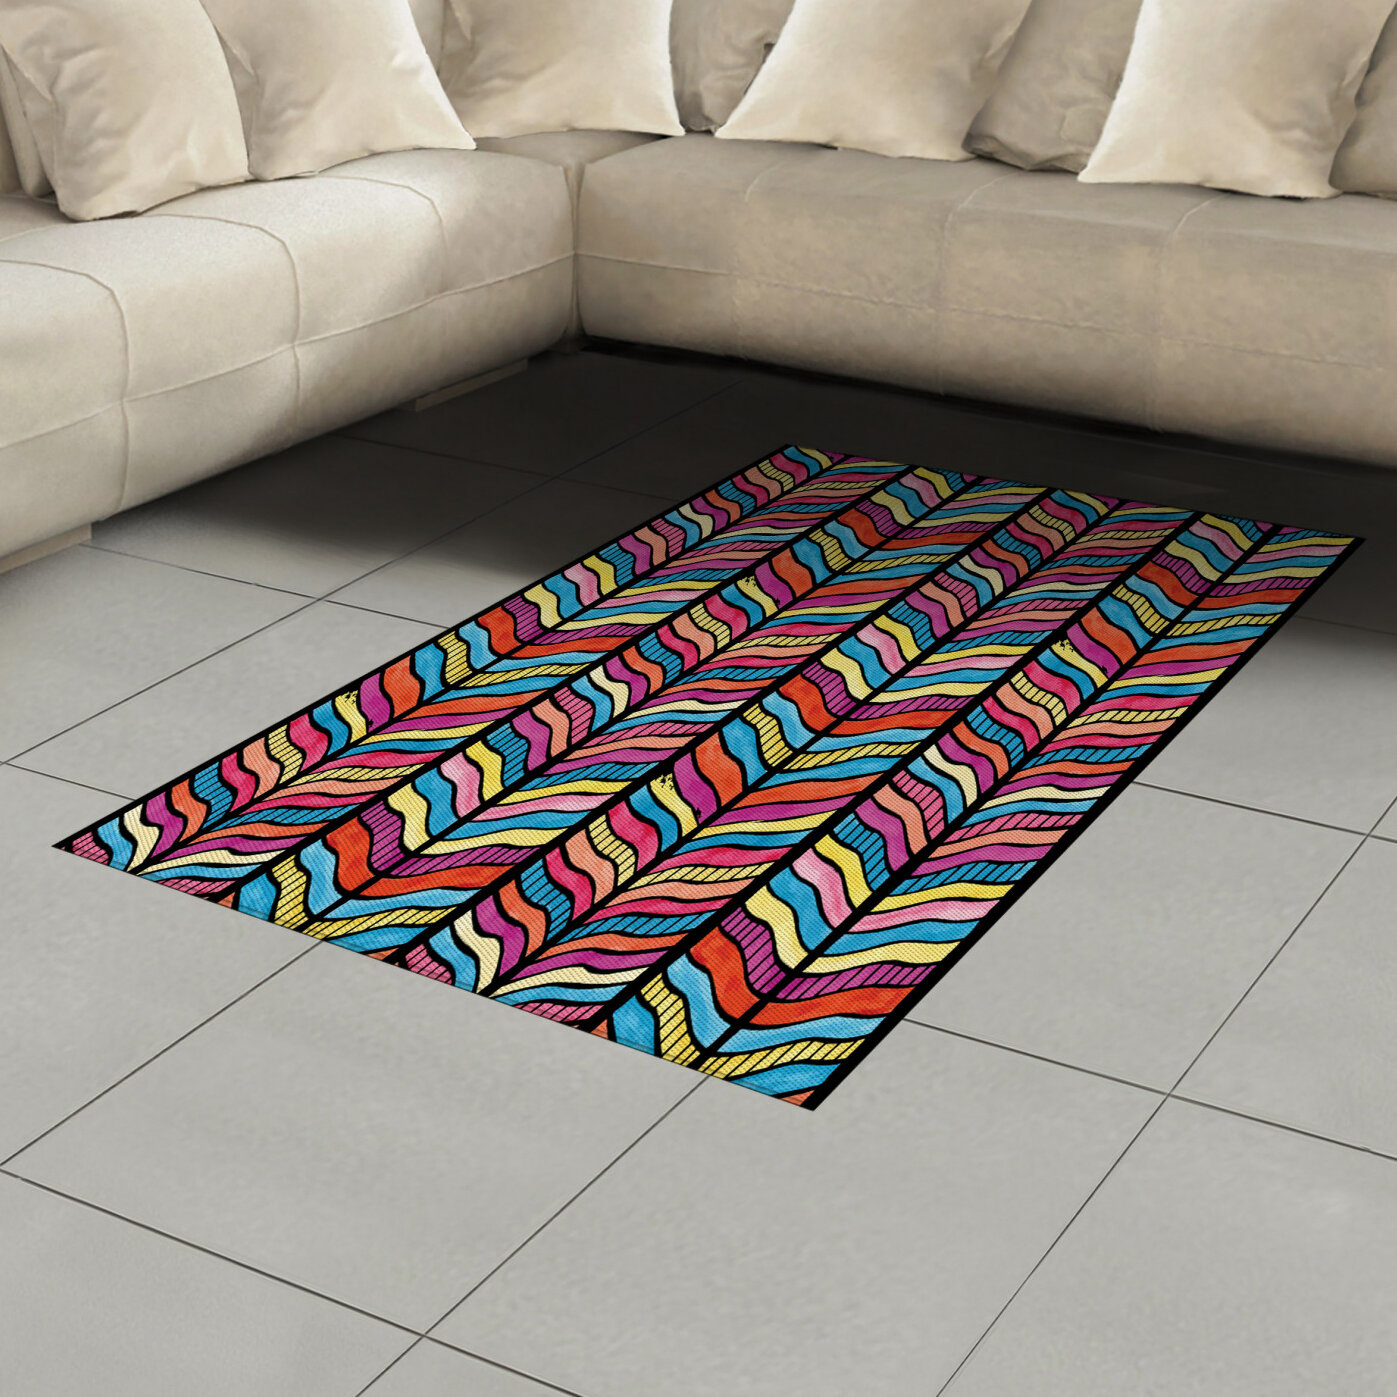 East Urban Home Ambesonne Abstract Area Rug